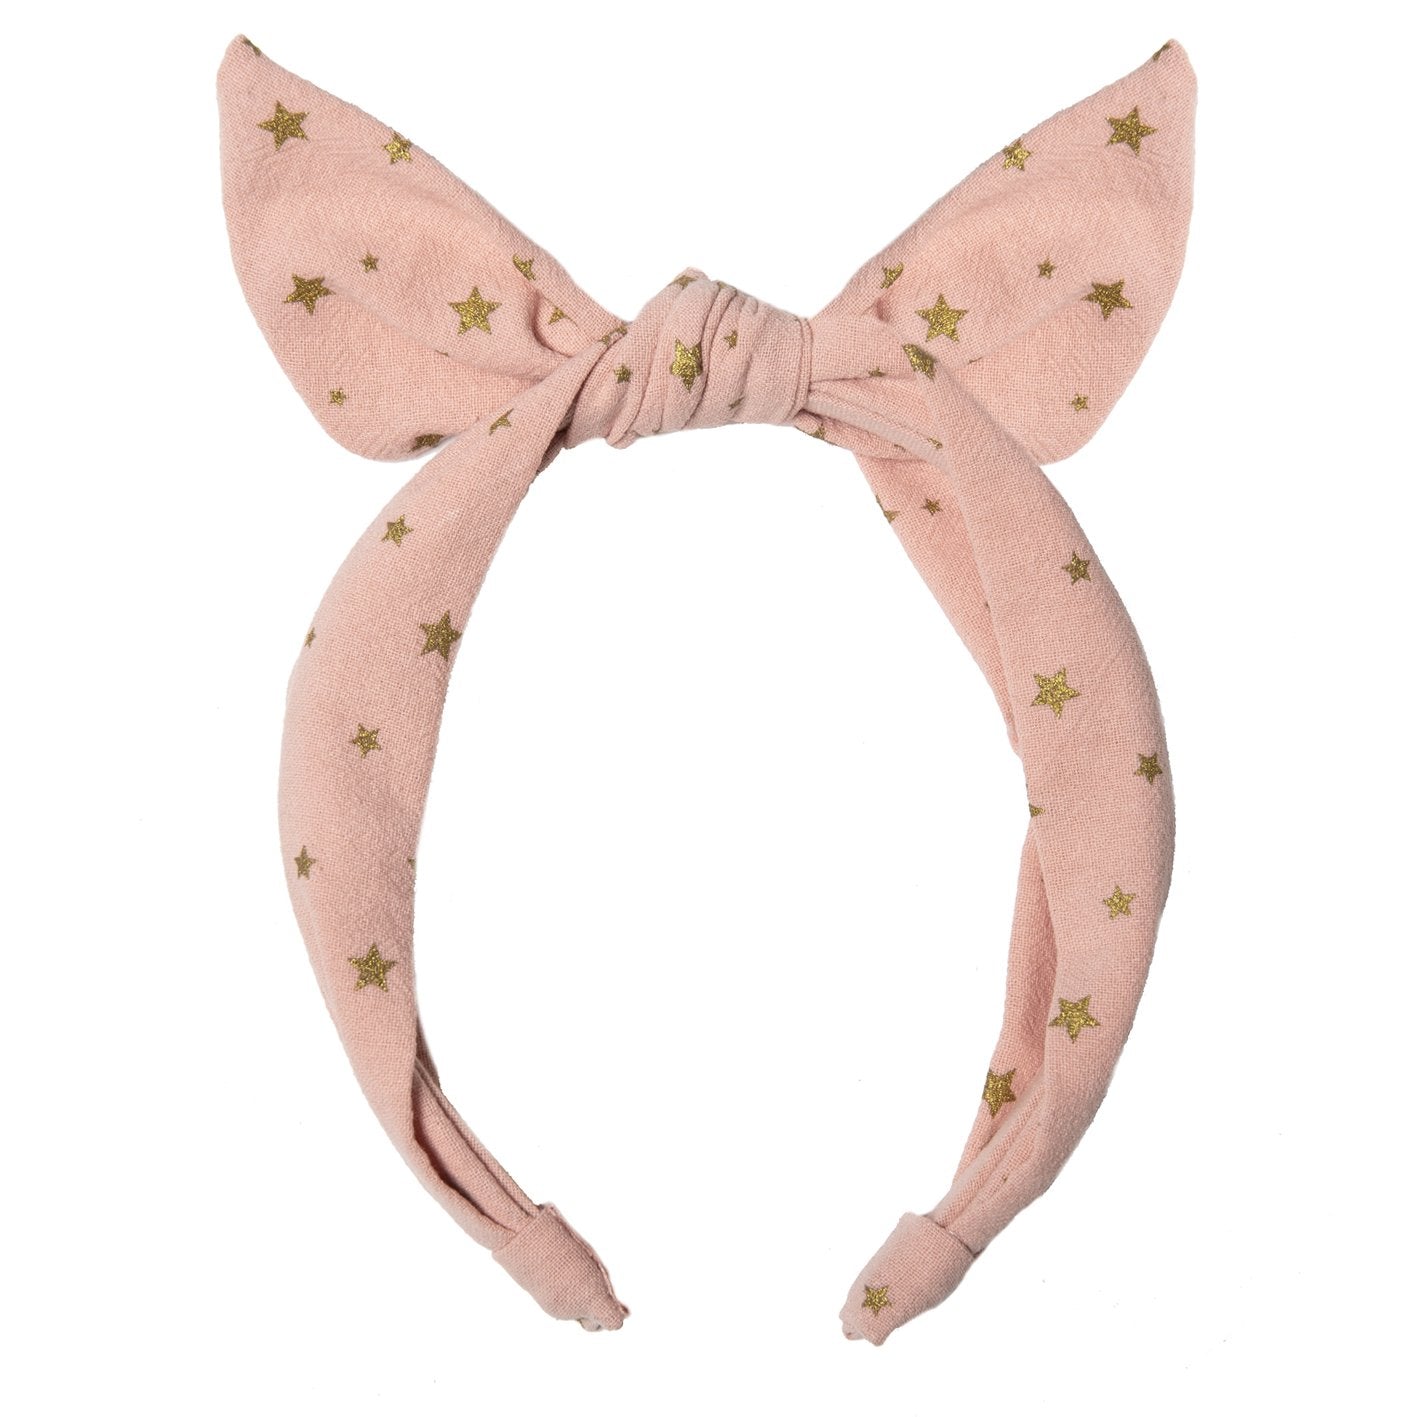 Scattered Stars Tie Headband Pink - Muddy Boots Home UK